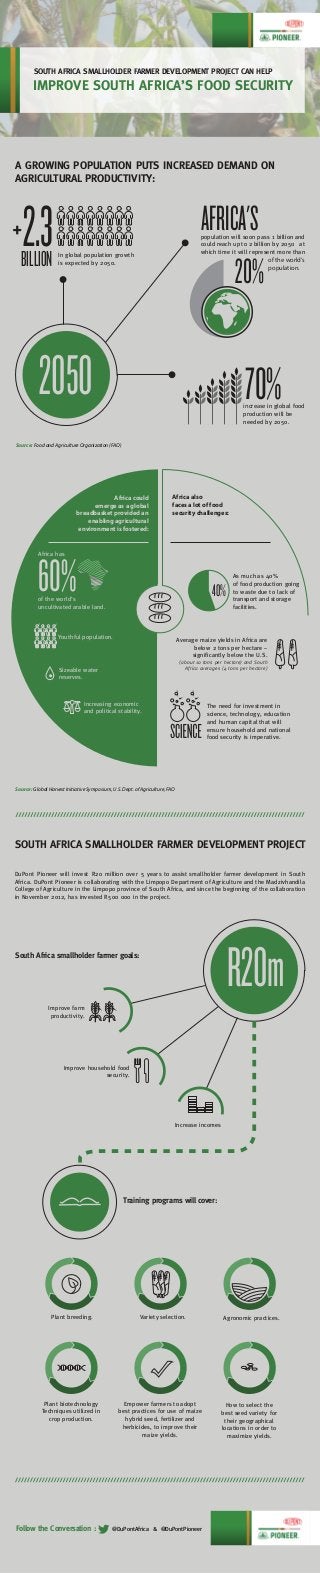 A GROWING POPULATION PUTS INCREASED DEMAND ON
AGRICULTURAL PRODUCTIVITY:
Improve farm
productivity.
SOUTH AFRICA SMALLHOLDER FARMER DEVELOPMENT PROJECT
IMPROVE SOUTH AFRICA’S FOOD SECURITY
SOUTH AFRICA SMALLHOLDER FARMER DEVELOPMENT PROJECT CAN HELP
BILLION
+2.3
2050 70%
60% 40%
20%
of the world’s
population.
In global population growth
is expected by 2050.
population will soon pass 1 billion and
could reach up to 2 billion by 2050 at
which time it will represent more than
AFRICA'S
increase in global food
production will be
needed by 2050.
of the world’s
uncultivated arable land.
Africa has
Africa could
emerge as a global
breadbasket provided an
enabling agricultural
environment is fostered:
Africa also
faces a lot of food
security challenges:
As much as 40%
of food production going
to waste due to lack of
transport and storage
facilities.
The need for investment in
science, technology, education
and human capital that will
ensure household and national
food security is imperative.
Increasing economic
and political stability.
Average maize yields in Africa are
below 2 tons per hectare –
significantly below the U.S.
(about 10 tons per hectare) and South
Africa averages (4 tons per hectare)Sizeable water
reserves.
Youthful population.
R20m
Training programs will cover:
Follow the Conversation :
South Africa smallholder farmer goals:
Improve household food
security.
Increase incomes
DuPont Pioneer will invest R20 million over 5 years to assist smallholder farmer development in South
Africa. DuPont Pioneer is collaborating with the Limpopo Department of Agriculture and the Madzivhandila
College of Agriculture in the Limpopo province of South Africa, and since the beginning of the collaboration
in November 2012, has invested R500 000 in the project.
Source: Food and Agriculture Organization (FAO)
Source: Global Harvest Initiative Symposium, U.S. Dept. of Agriculture, FAO
Plant breeding. Variety selection. Agronomic practices.
Plant biotechnology
Techniques utilized in
crop production.
Empower farmers to adopt
best practices for use of maize
hybrid seed, fertilizer and
herbicides, to improve their
maize yields.
How to select the
best seed variety for
their geographical
locations in order to
maximize yields.
@DuPontAfrica & @DuPontPioneer
 